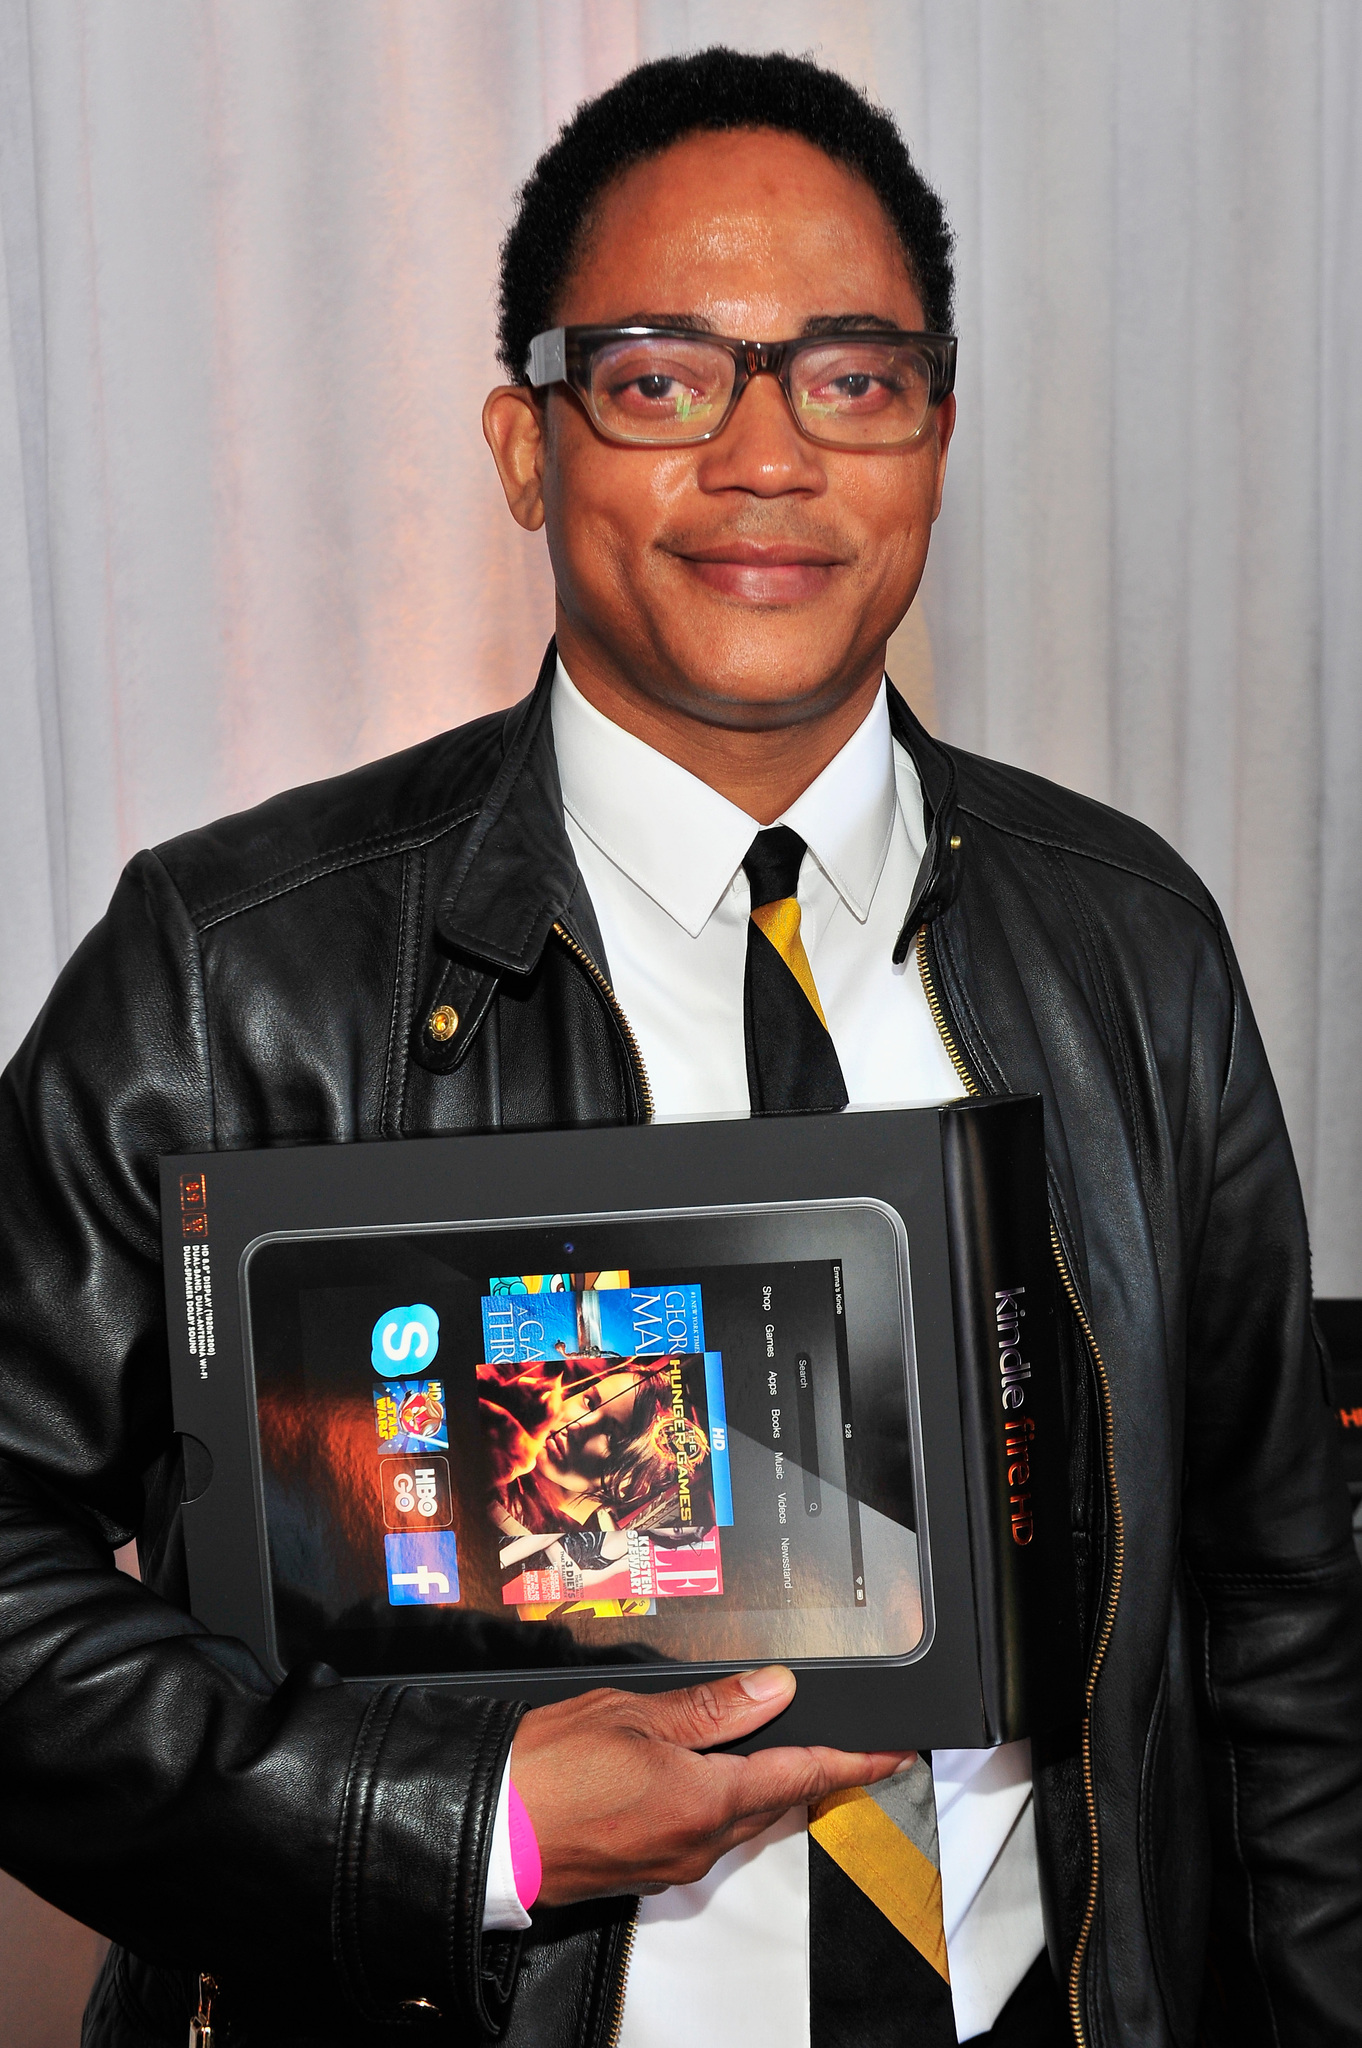 Patrick Cunningham poses in the Kindle Fire HD and IMDb Green Room during the 2013 Film Independent Spirit Awards at Santa Monica Beach on February 23, 2013 in Santa Monica, California.